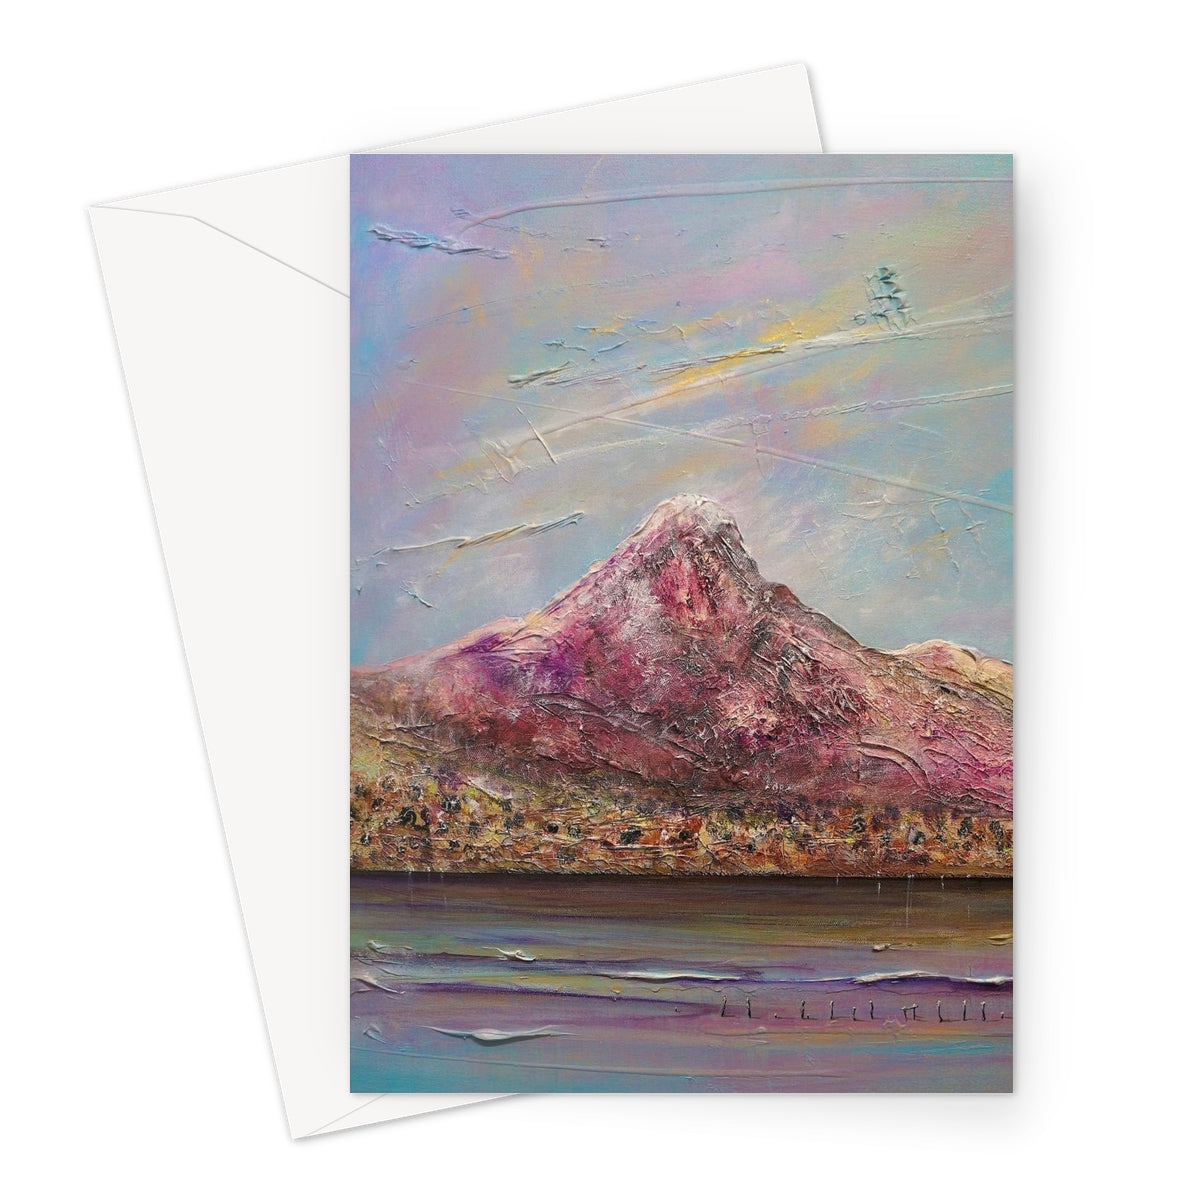 Ben Lomond Art Gifts Greeting Card-Greetings Cards-Scottish Lochs & Mountains Art Gallery-A5 Portrait-1 Card-Paintings, Prints, Homeware, Art Gifts From Scotland By Scottish Artist Kevin Hunter